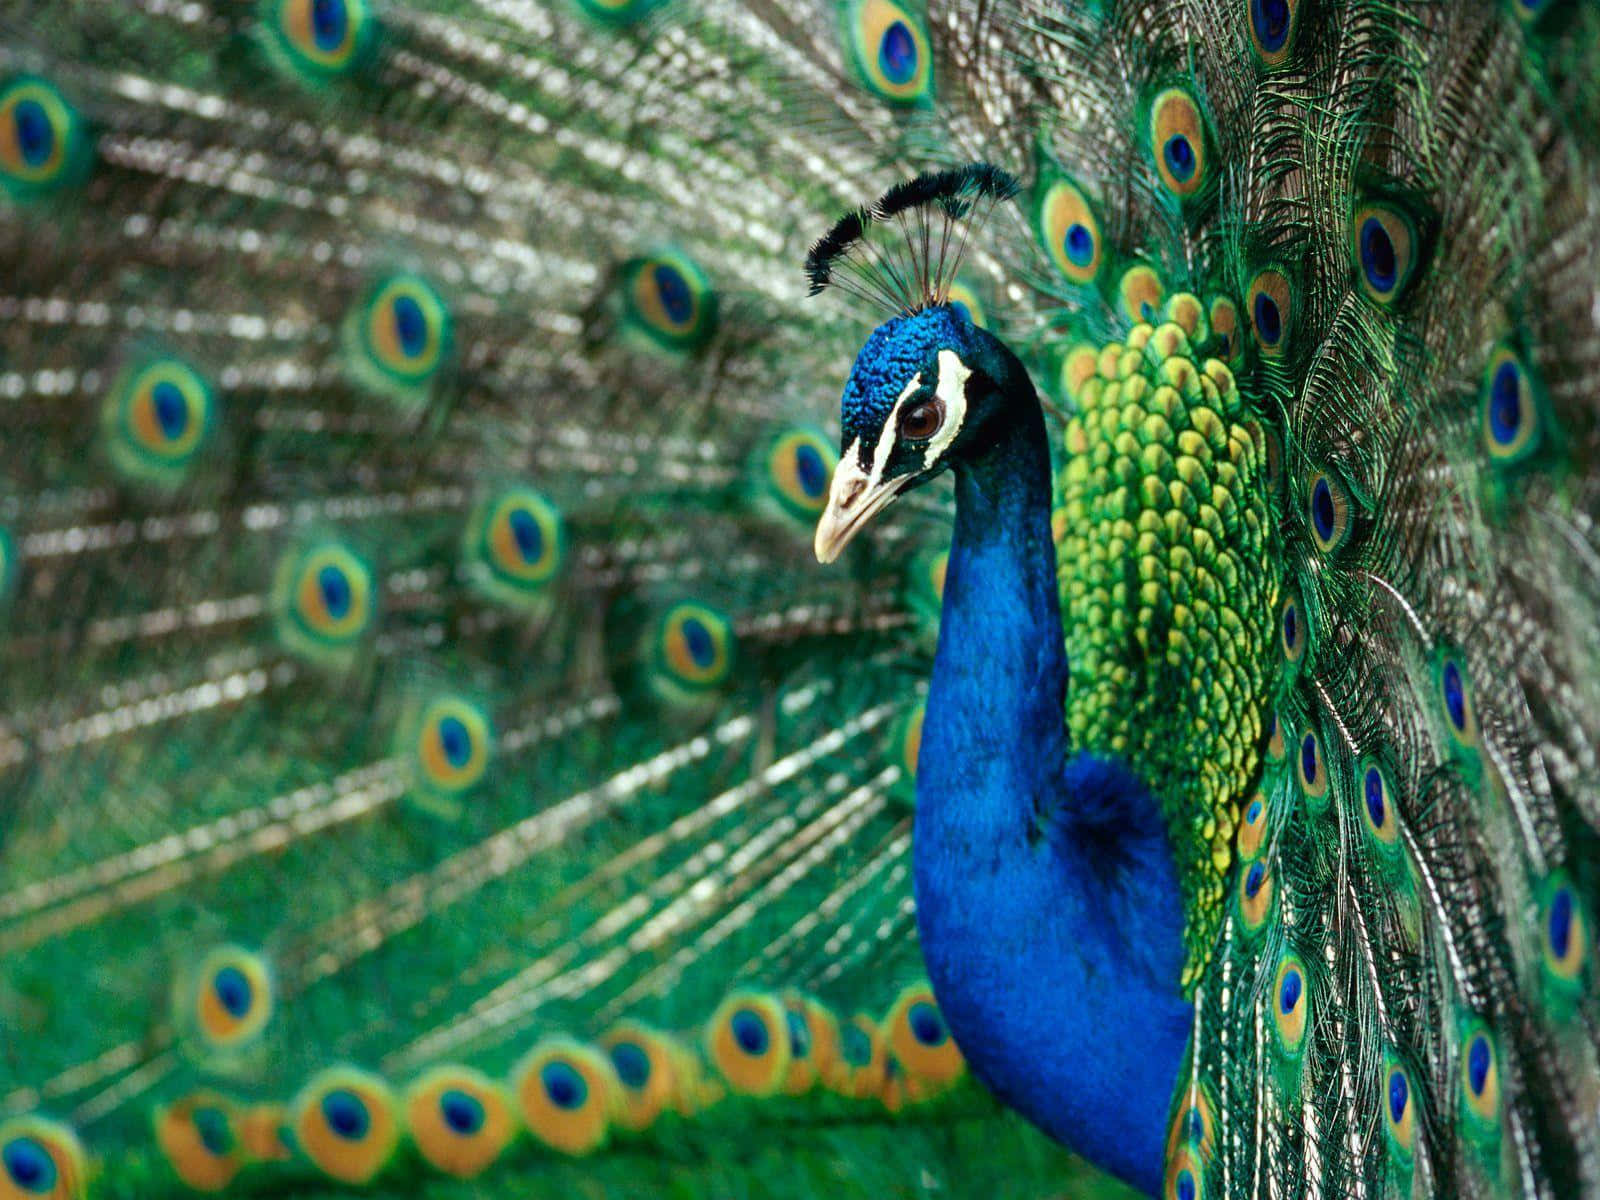 A magnificent peacock bird displaying its colorful feathers